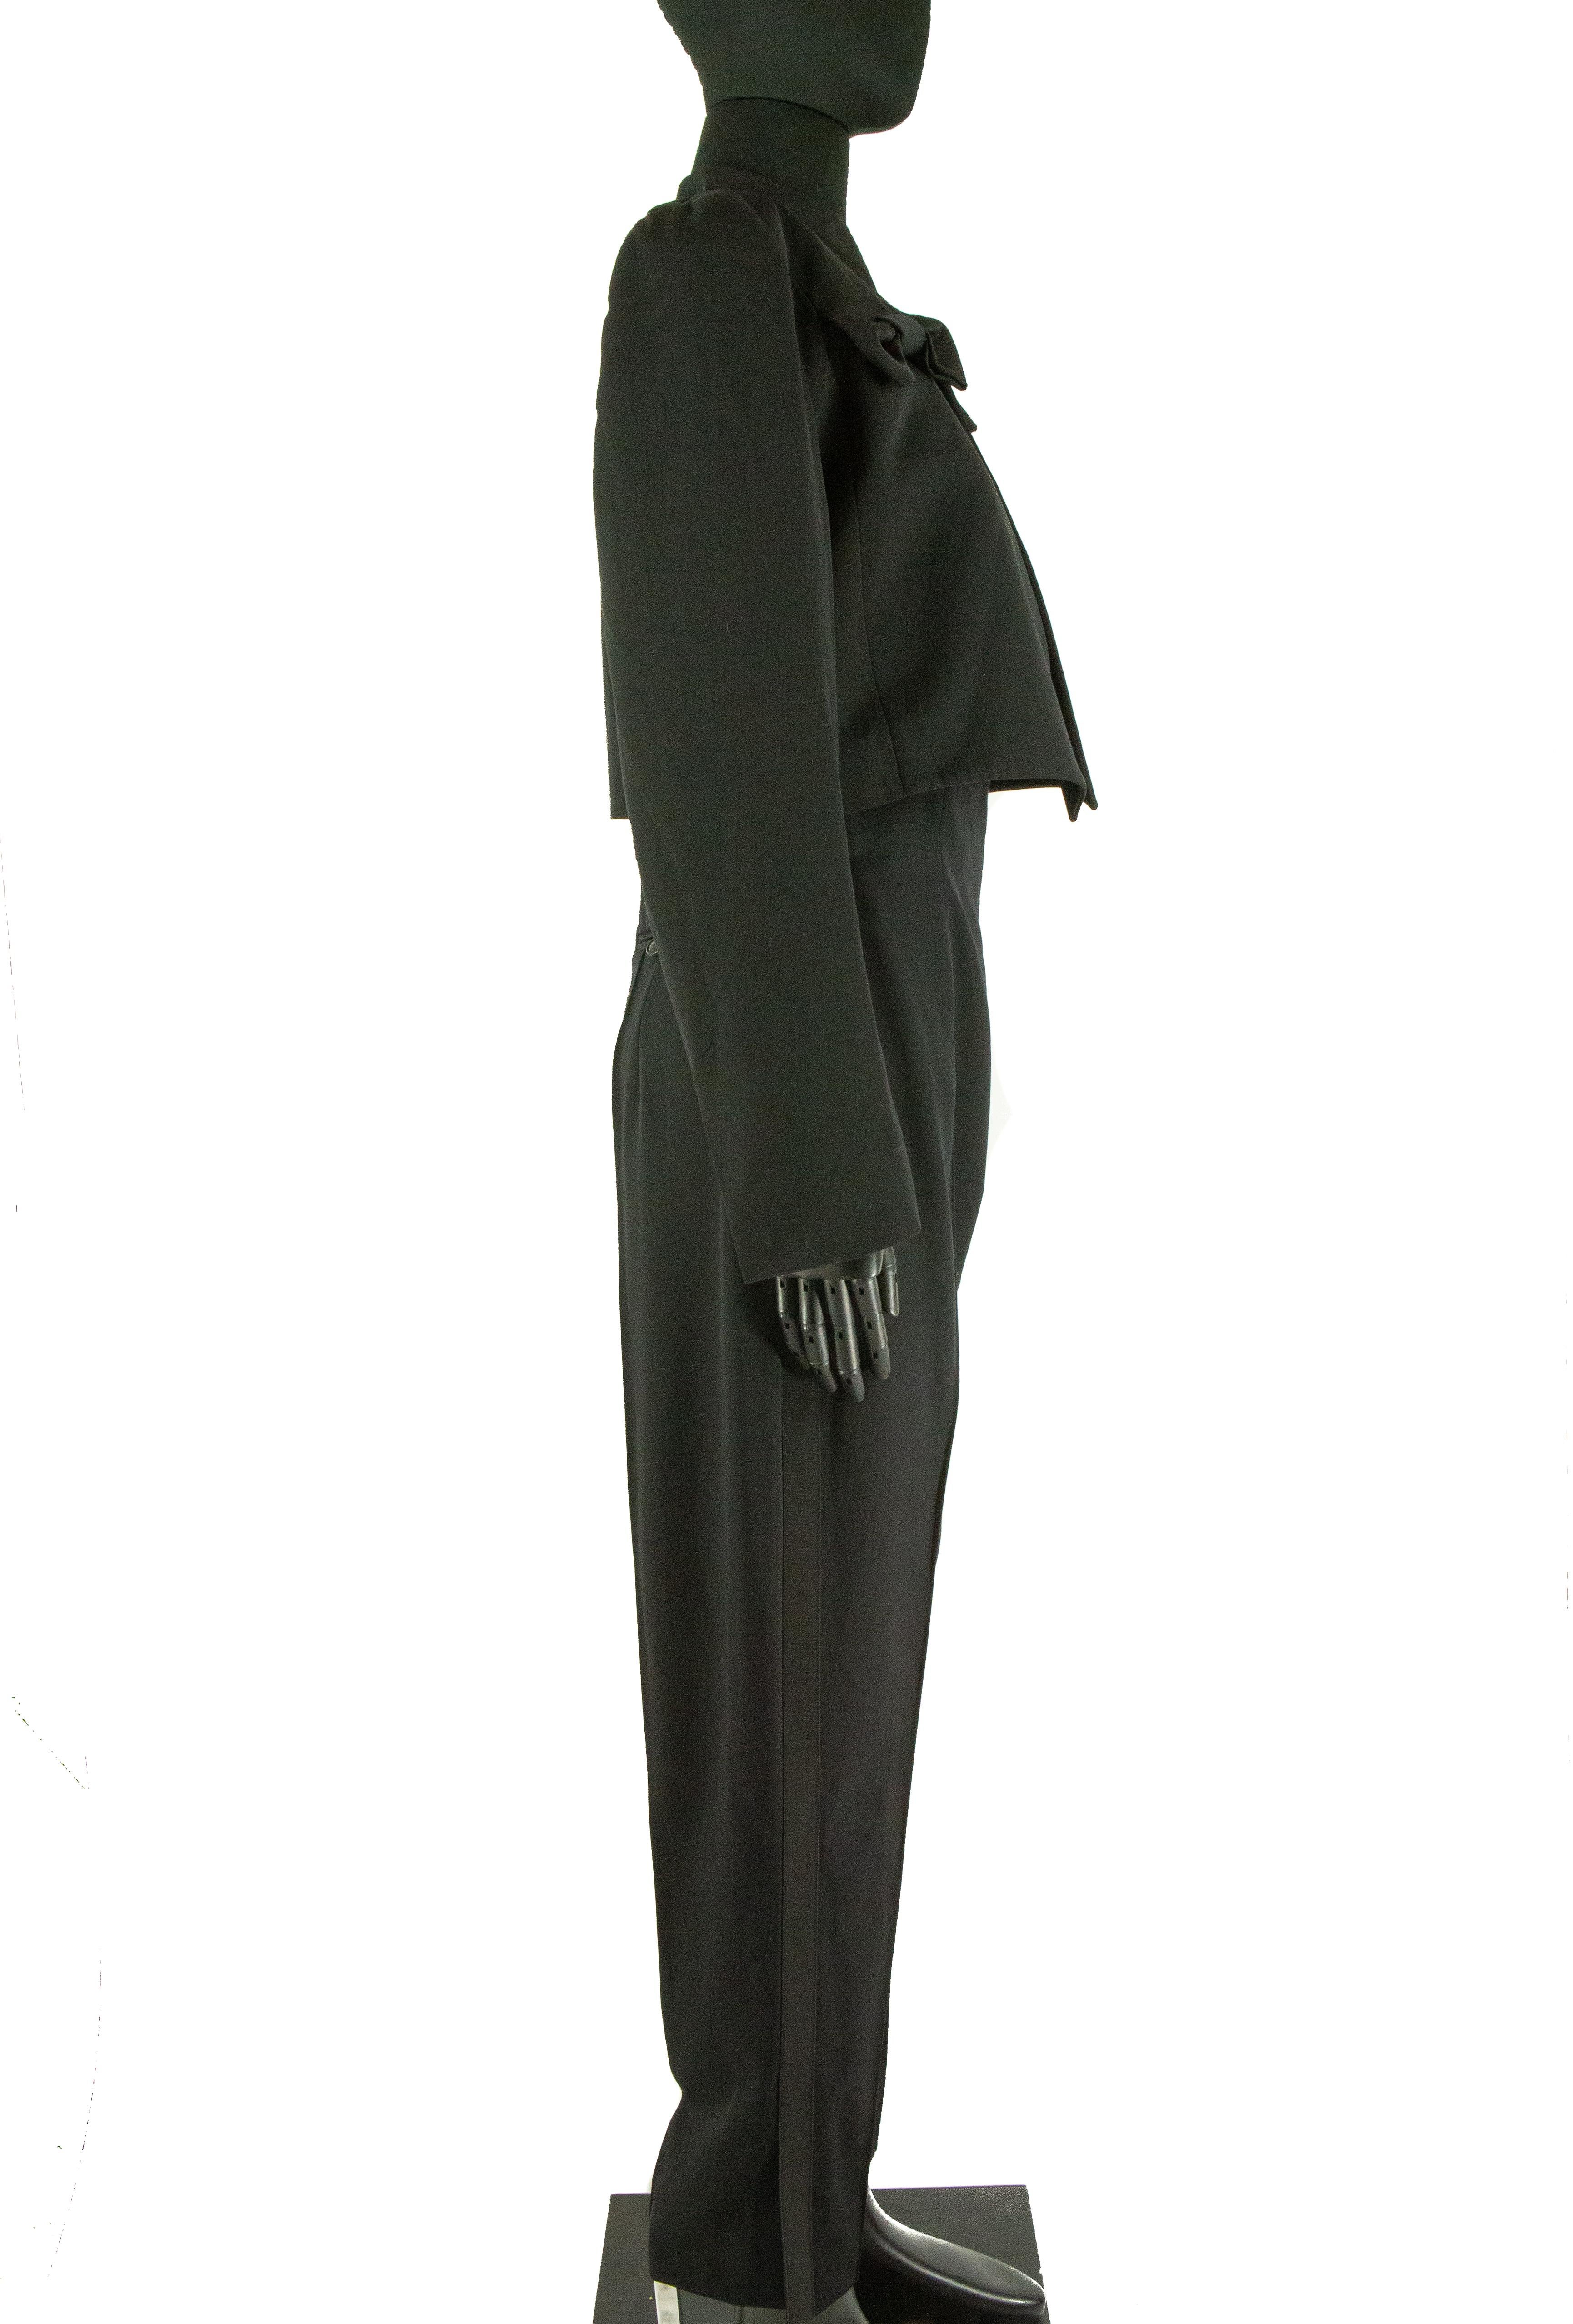 Black John Galliano For Givenchy Couture A/W 96 Jacket And Jumpsuit For Sale